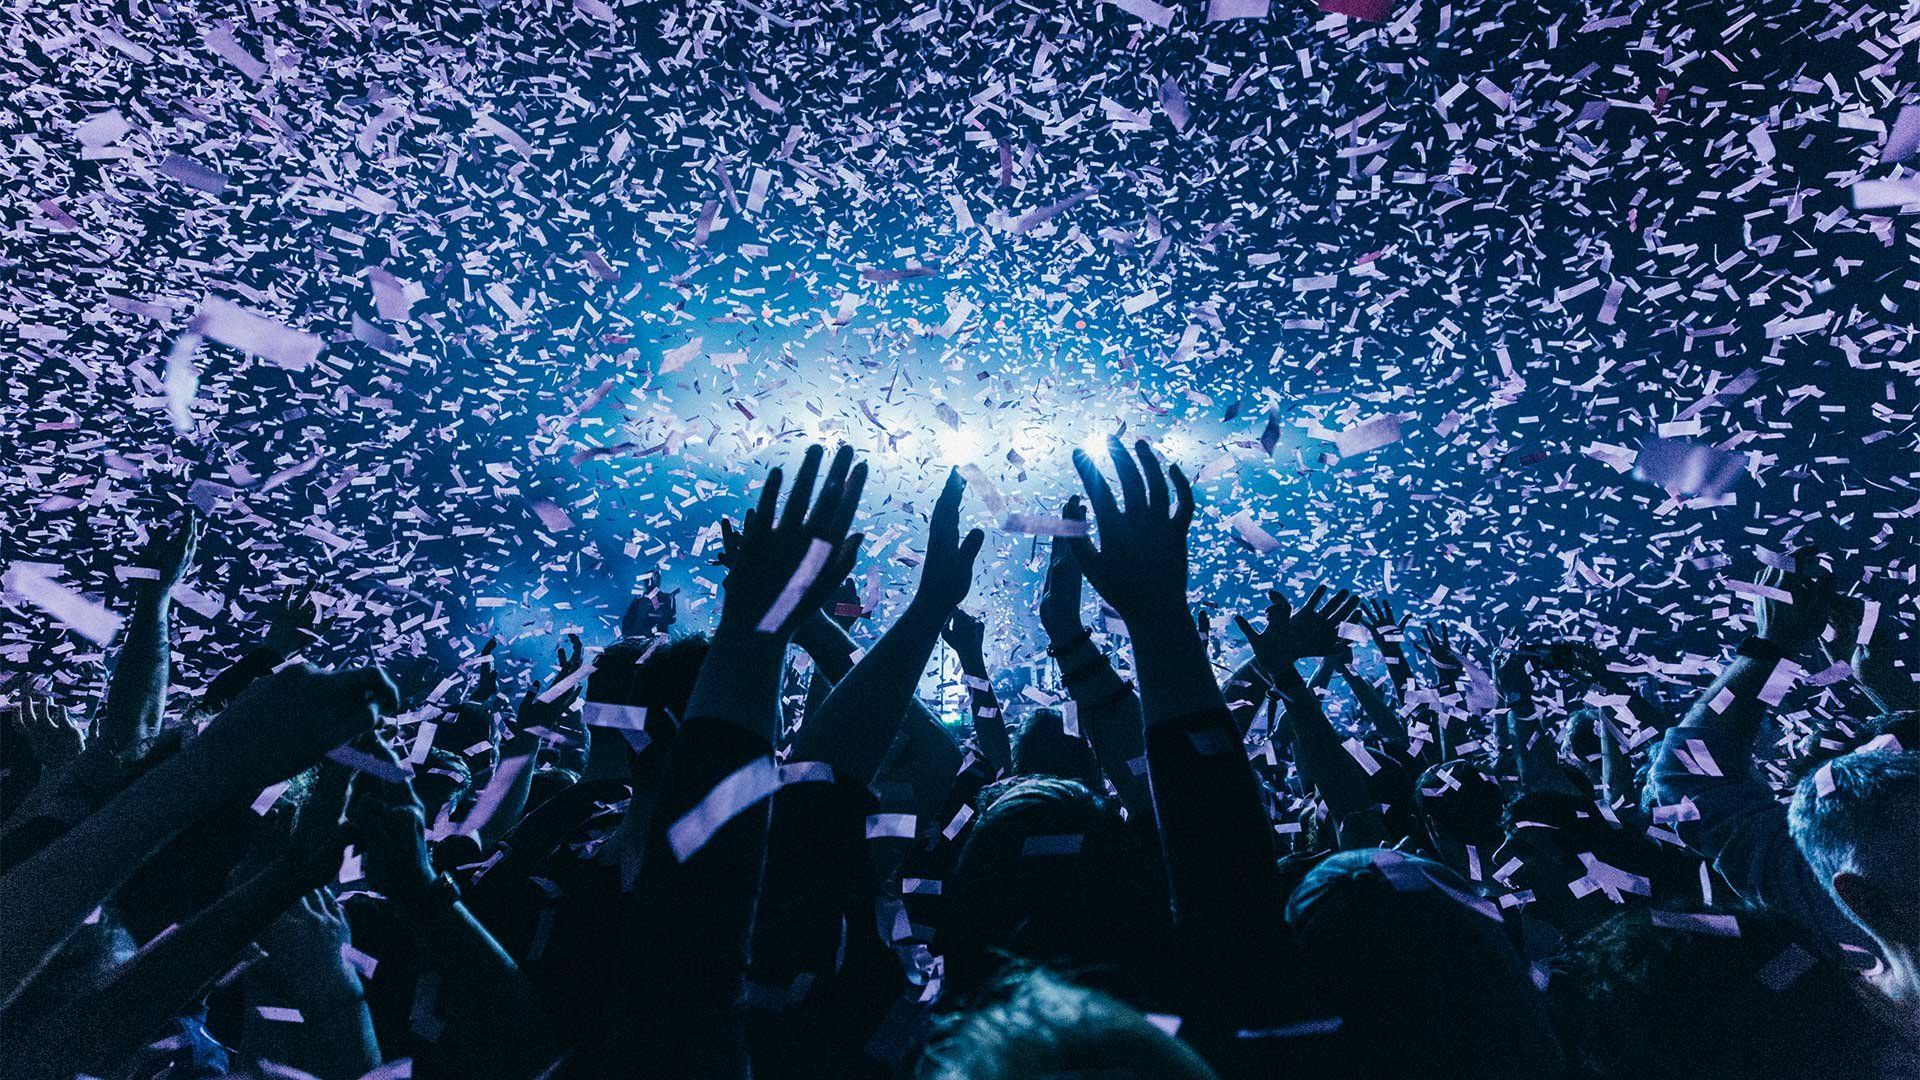 People in a festival audience hold up their hands as confetti showers down on them. Photo by Ben Morse.